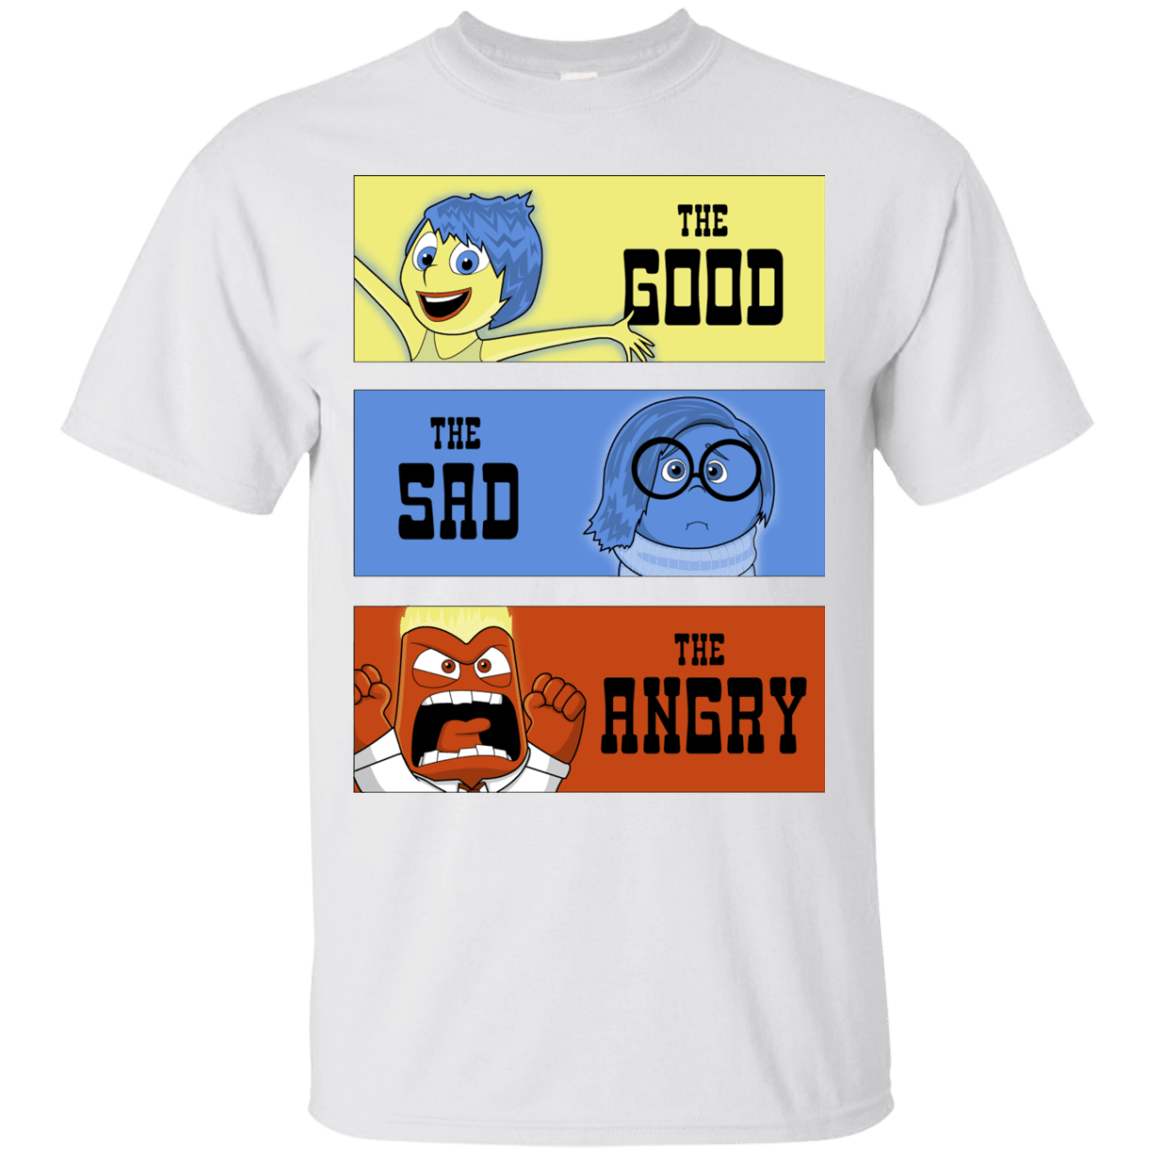 T-Shirts White / S The Good, the Sad & the Angry T-Shirt